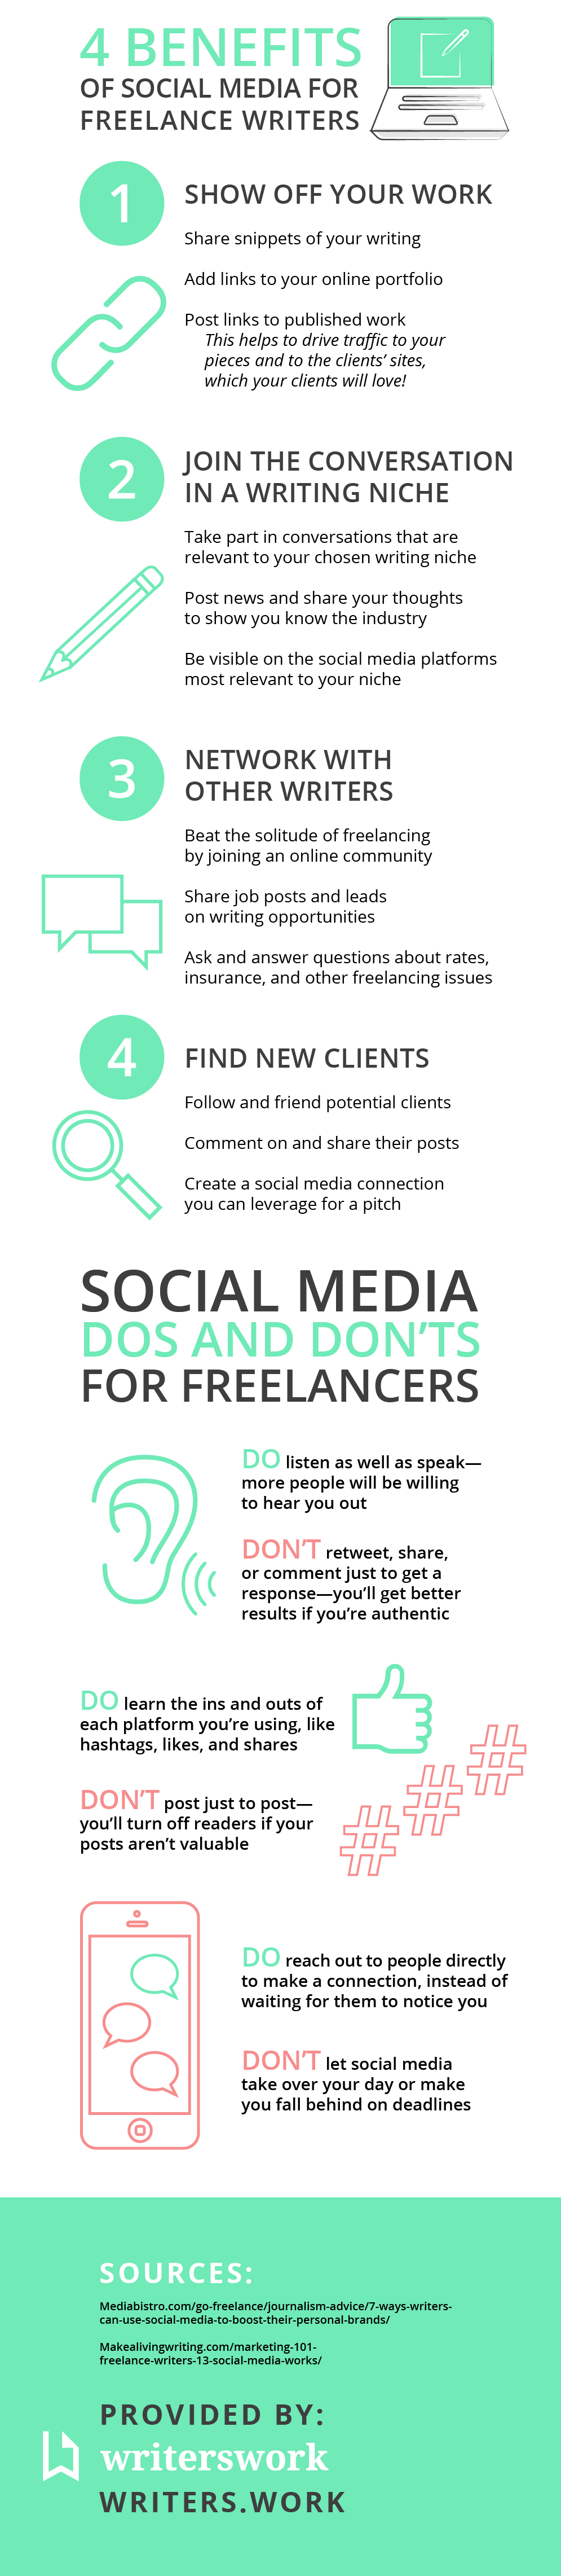 Infographic with tips for using social media as a freelance writer.